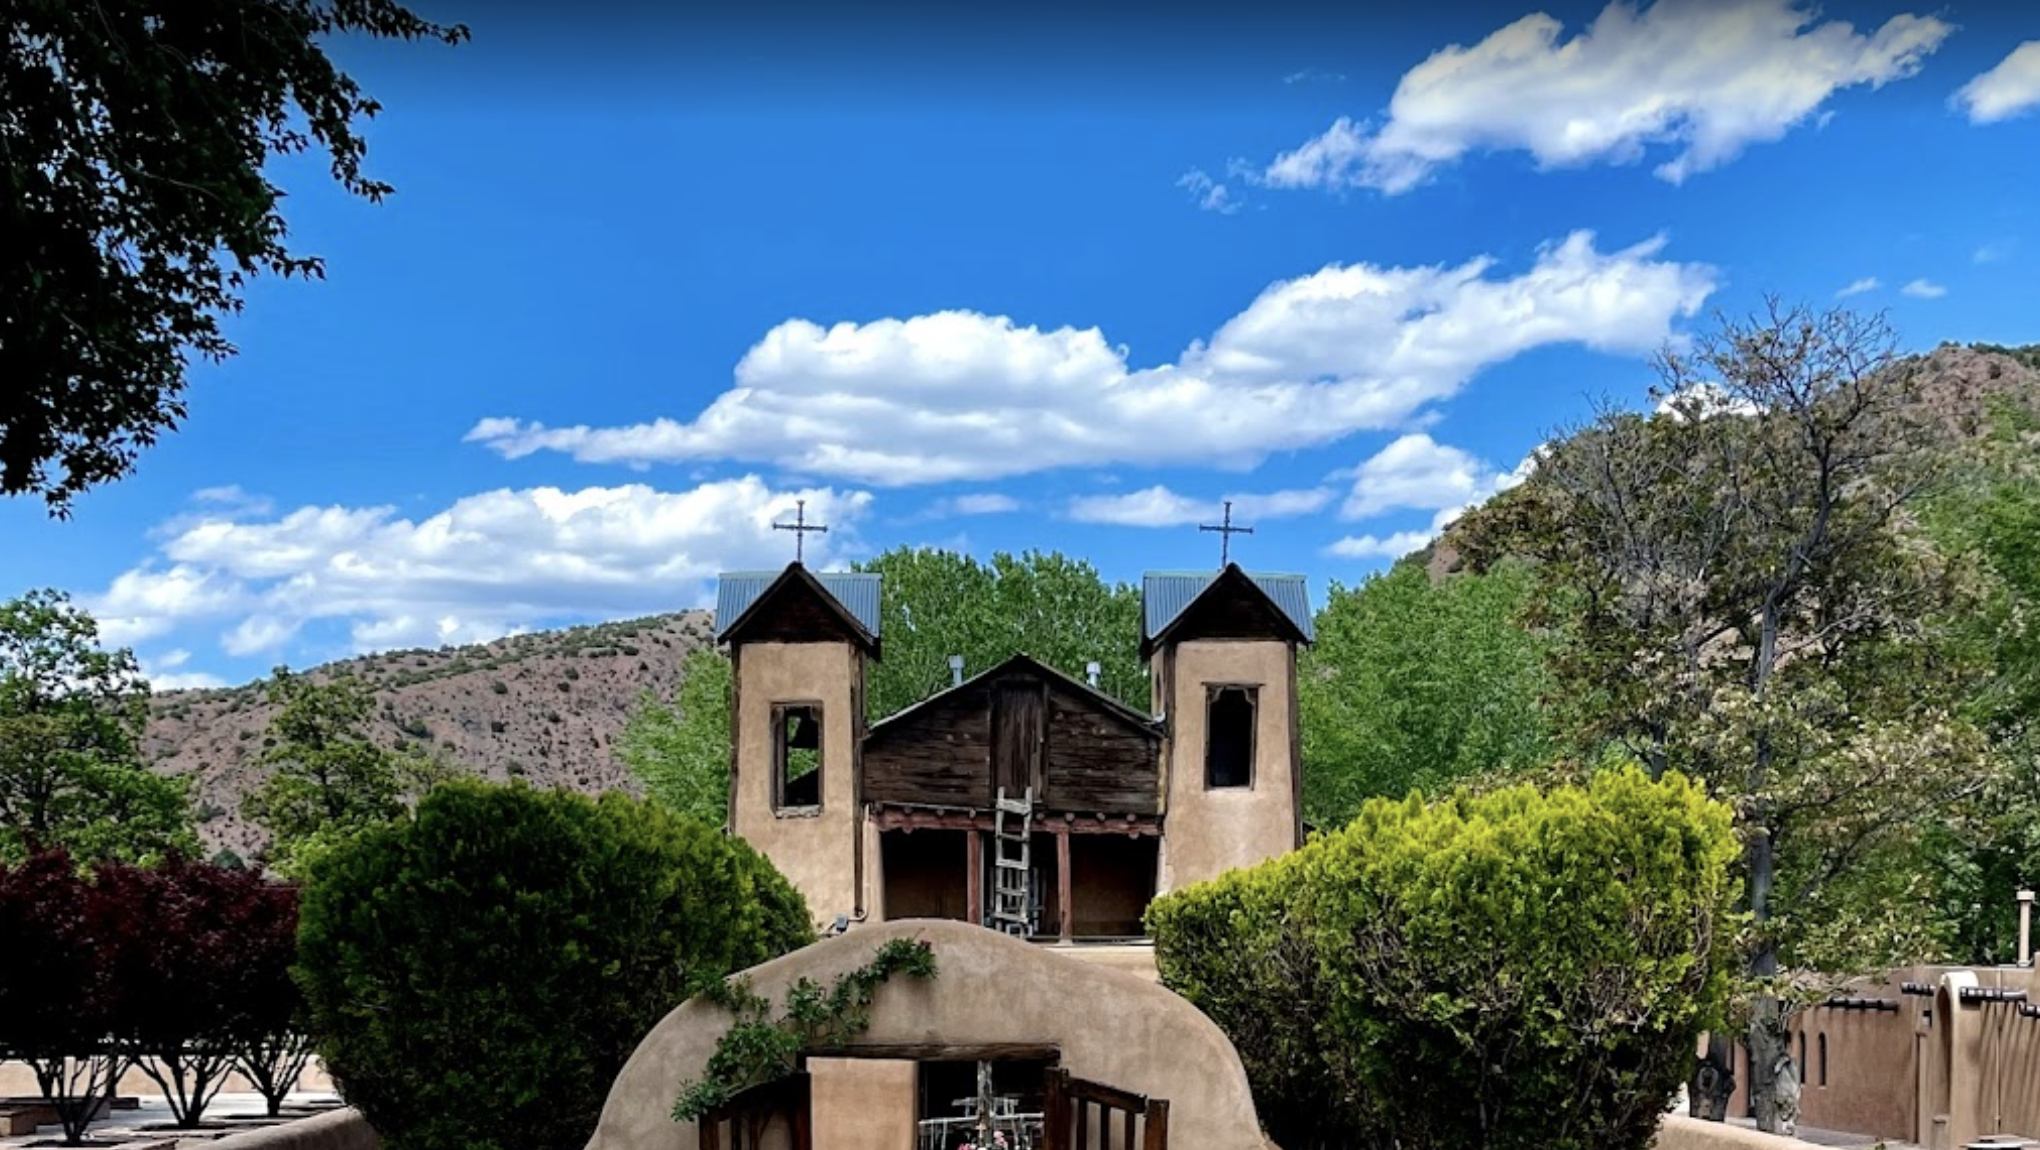 This Holy Site is Surrounded by Legends and Lore: The Origins of El Santuario de Chimayo nuestro stories